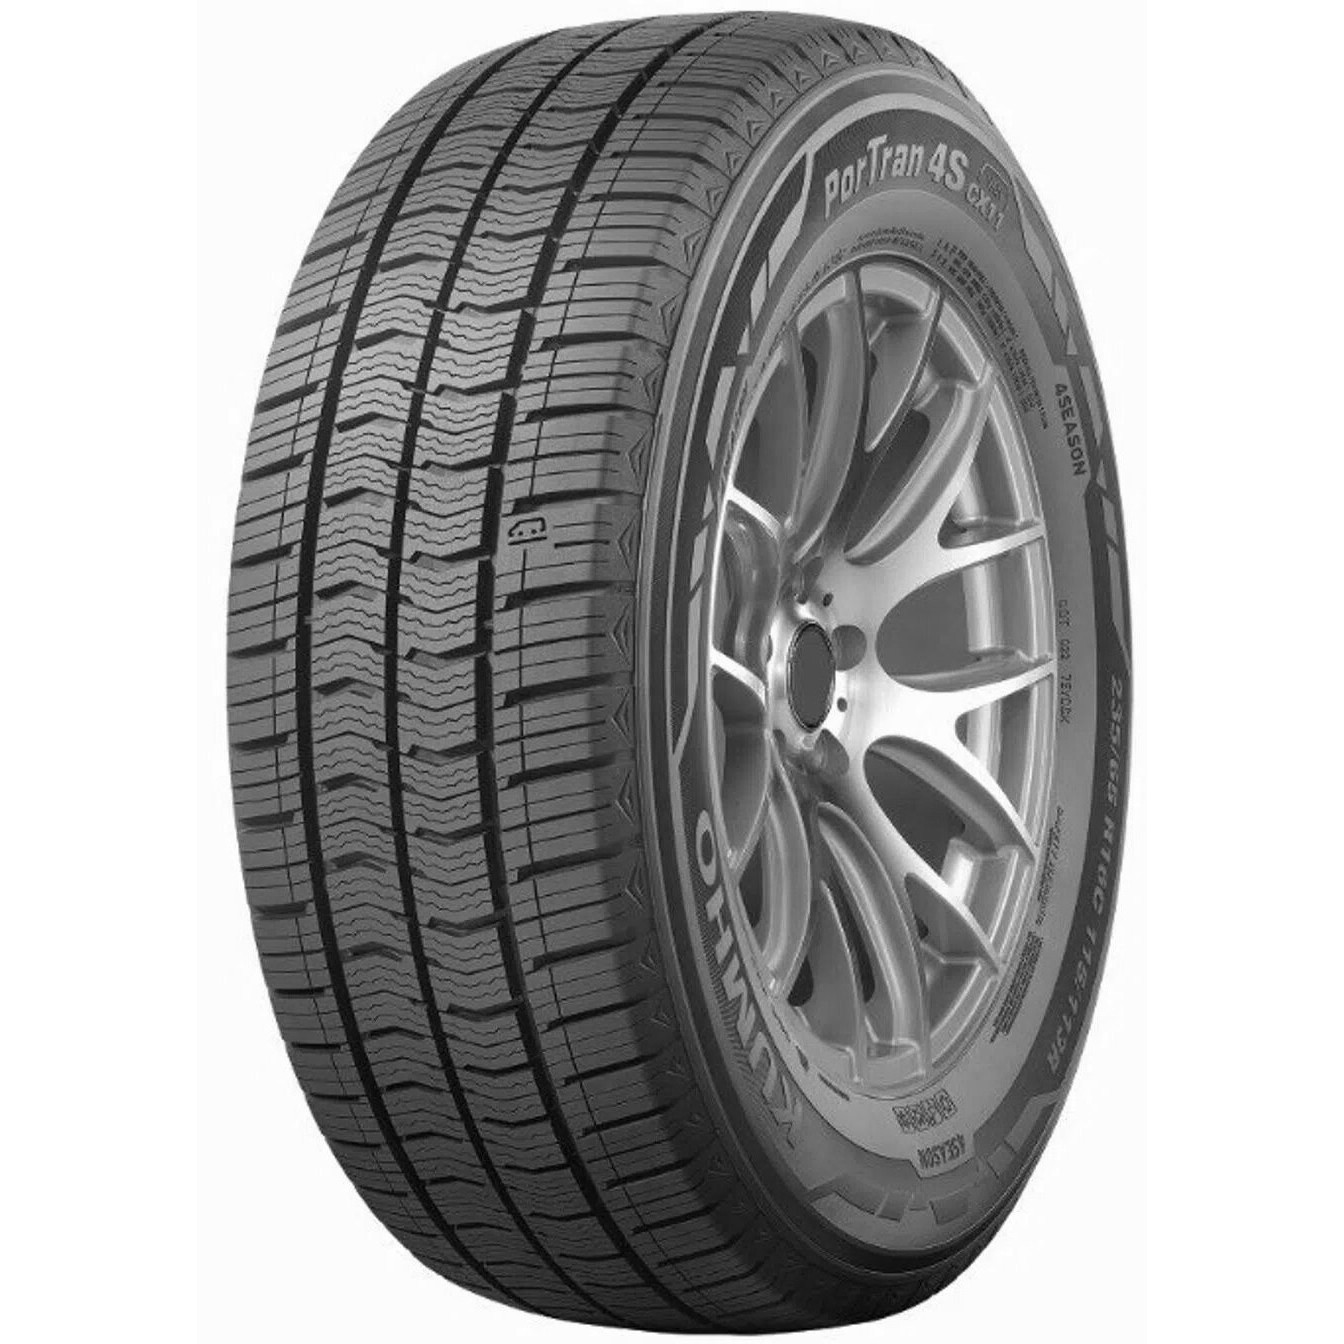 Gomme Nuove Marshal 215/60 R17 109T CX11 M+S pneumatici nuovi All Season